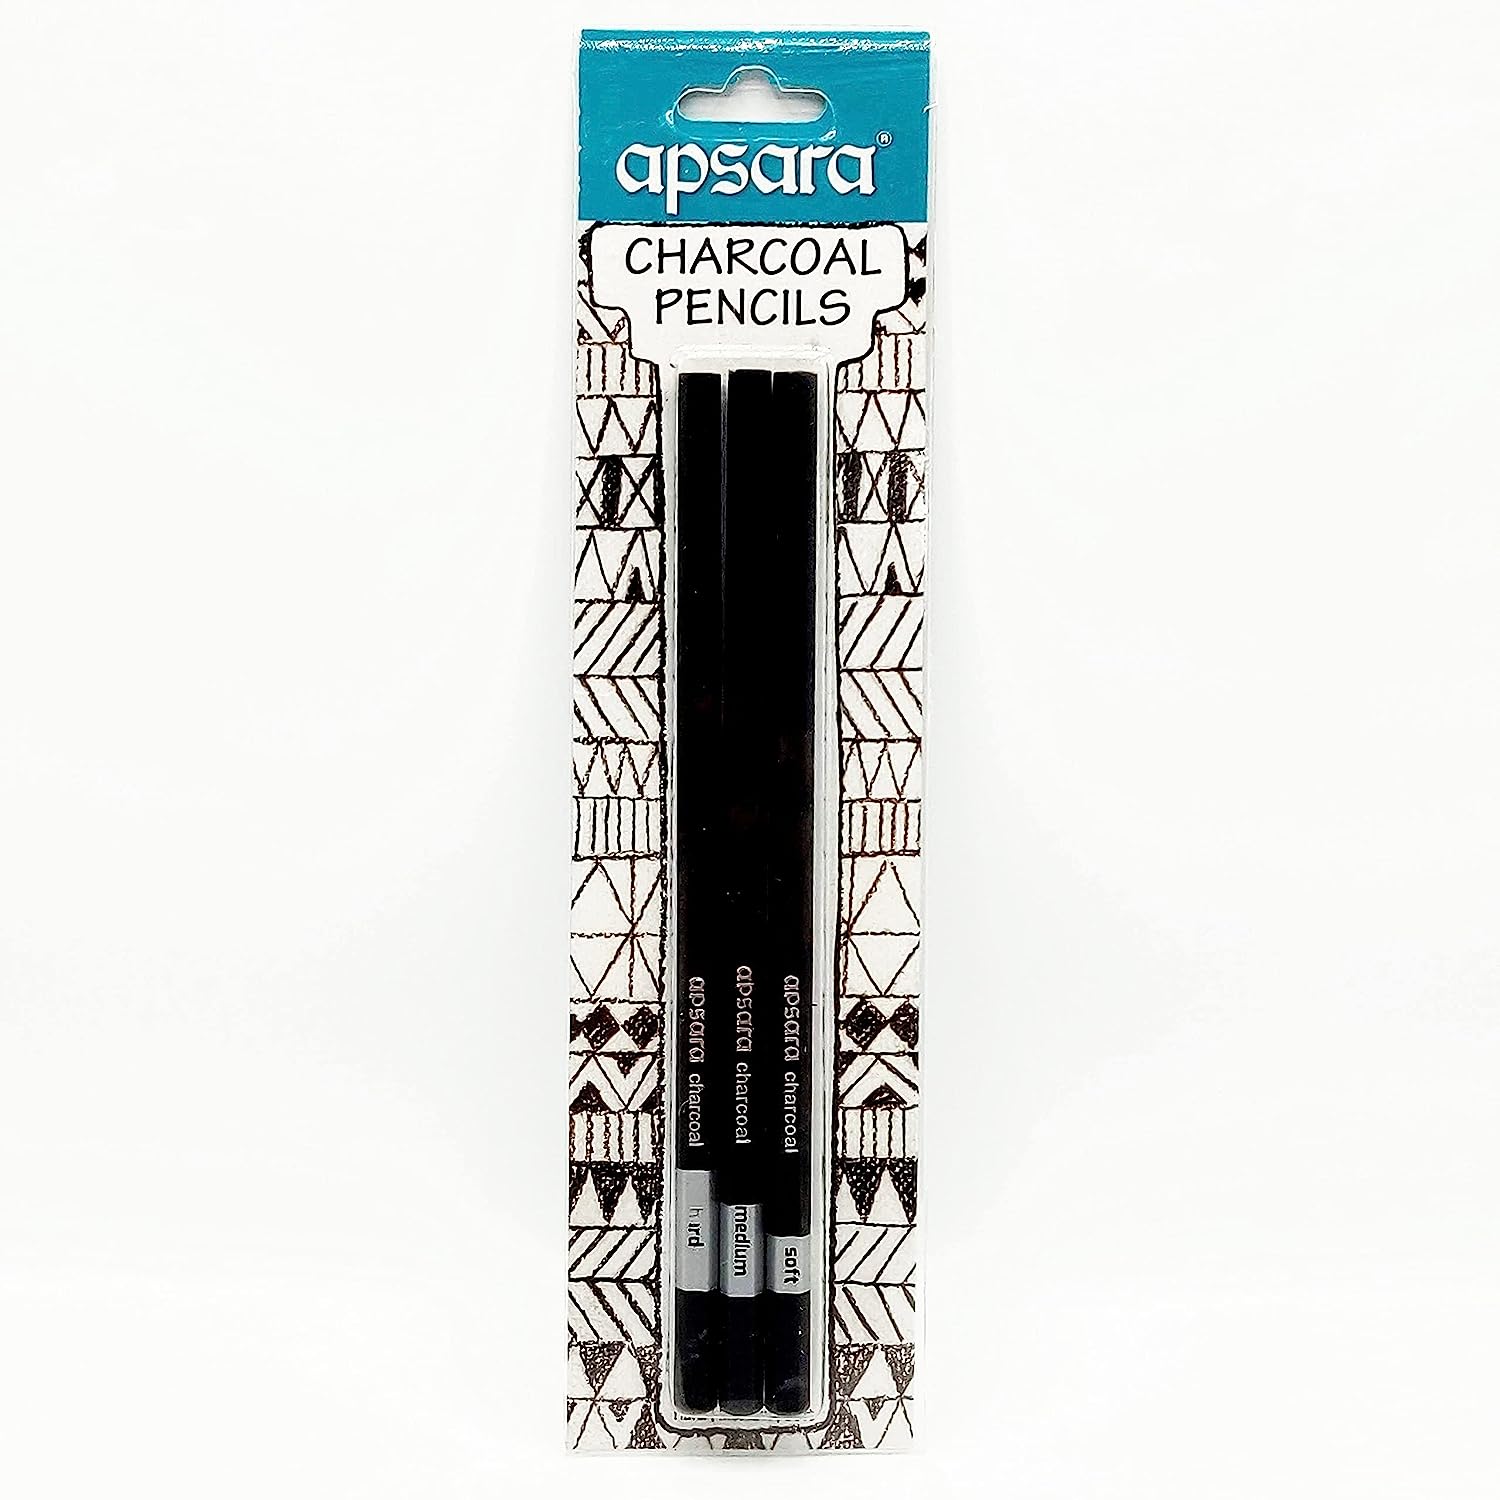 Charcoal Asso Pencils Pack-3 7000954 Camlin